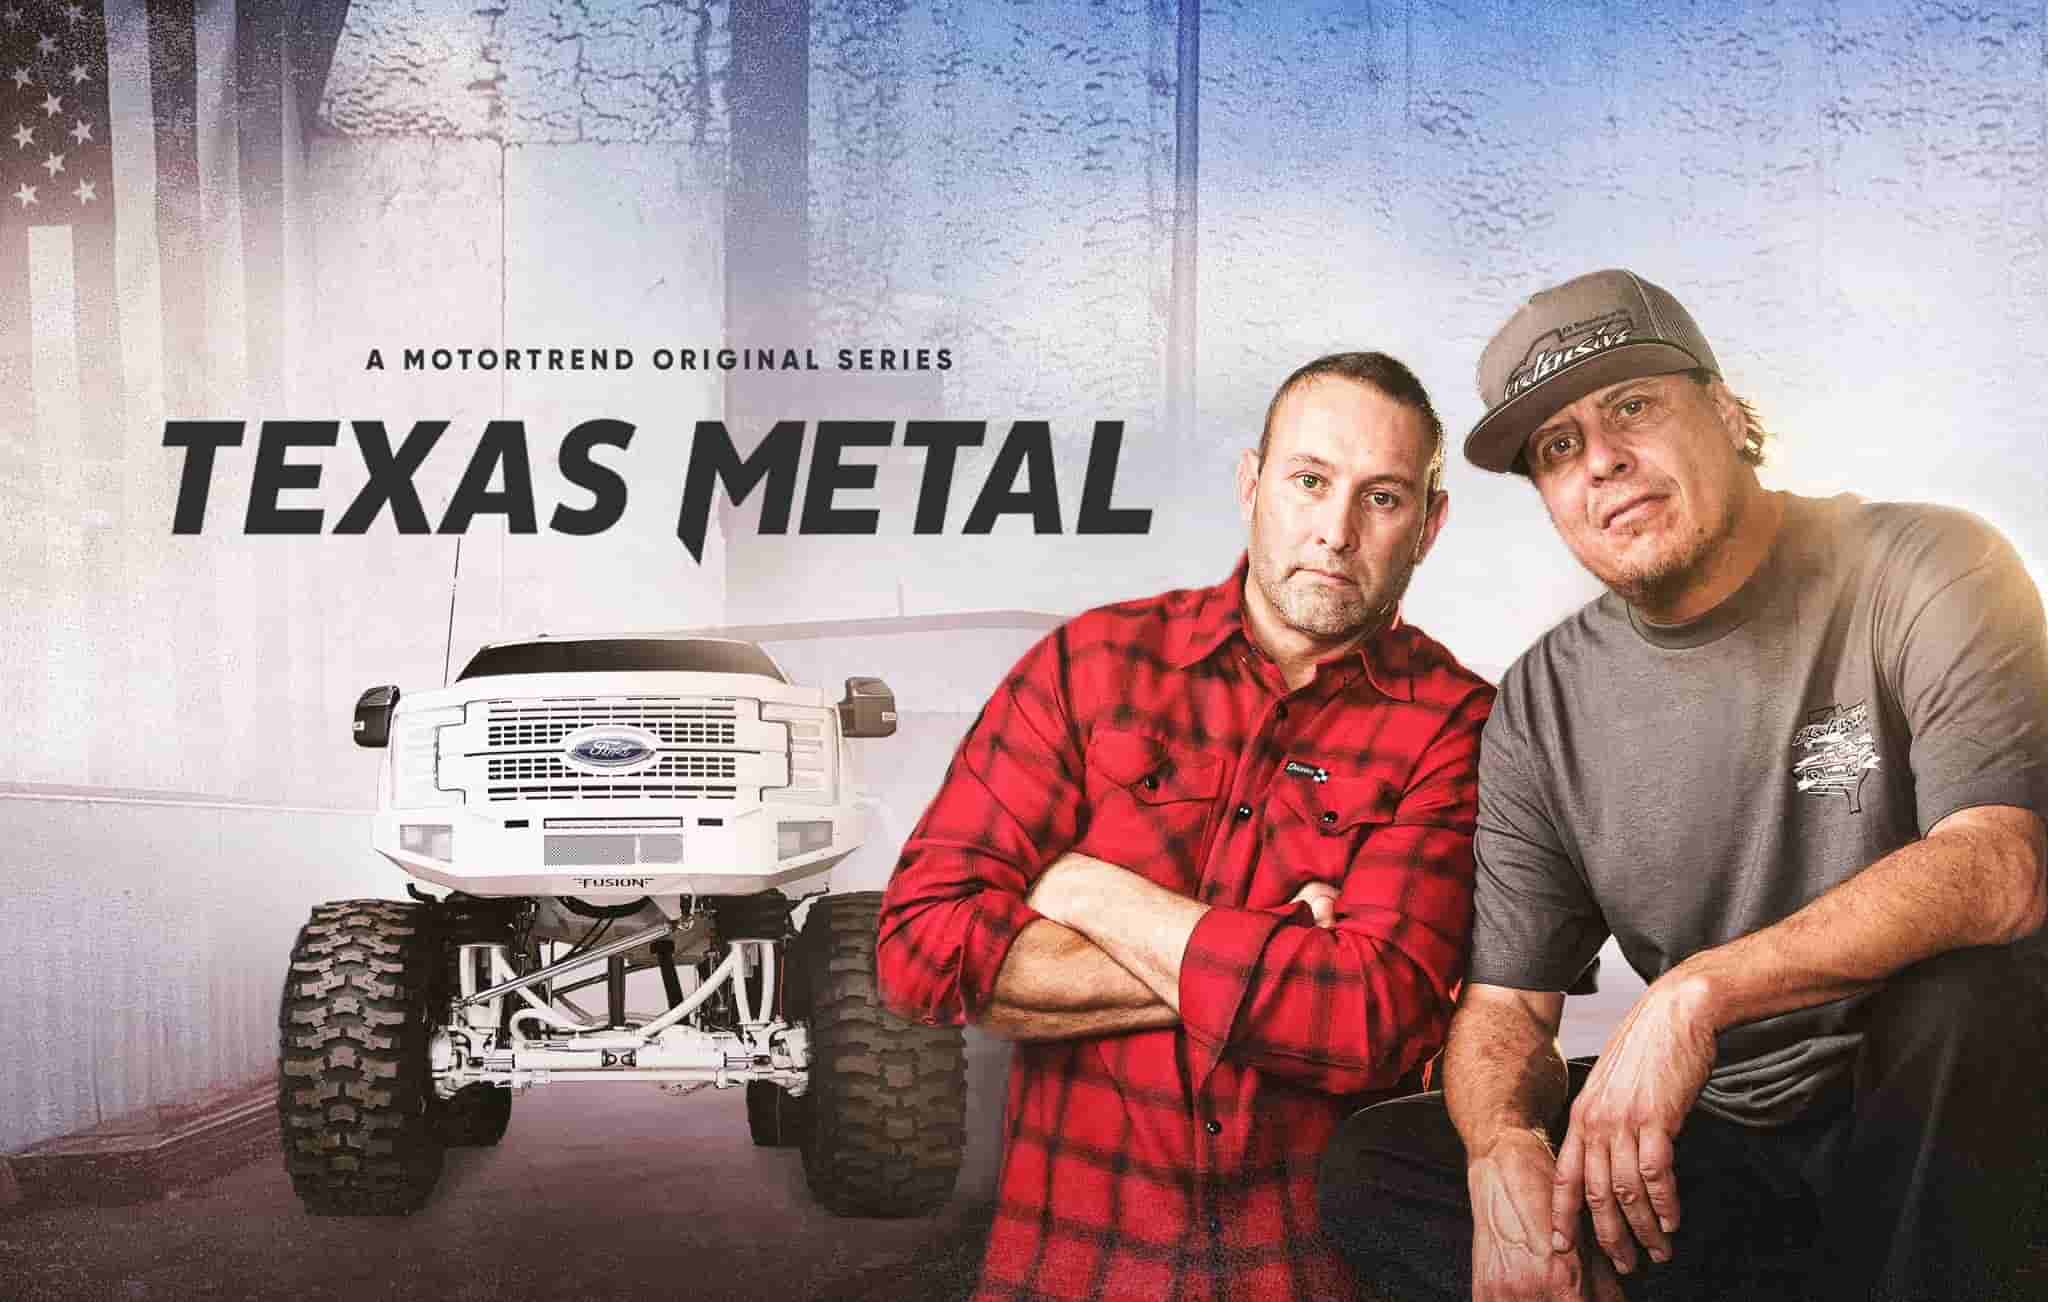 Image of the Metal and motor show, Texas Metal